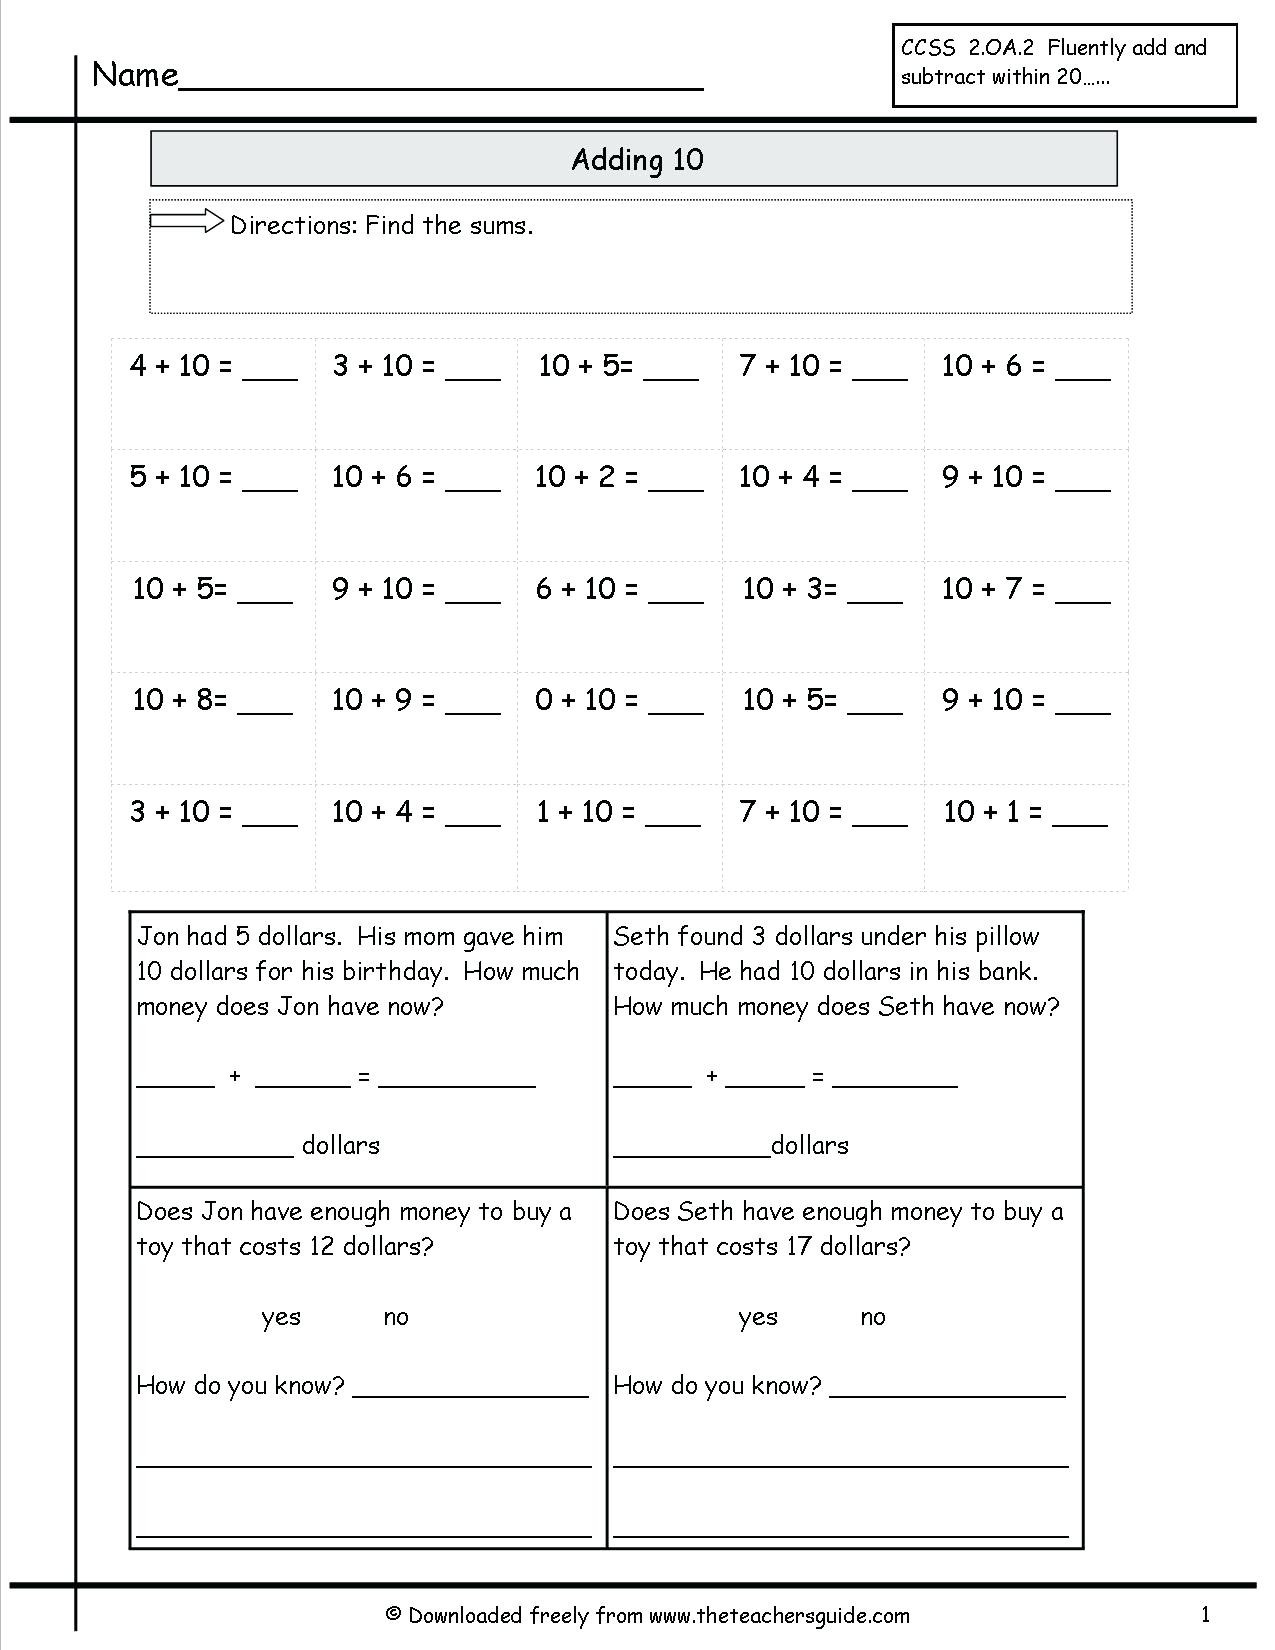 tens facts worksheet adding ten worksheet adding ten addition facts worksheet worksheets for kindergarten parts of the body